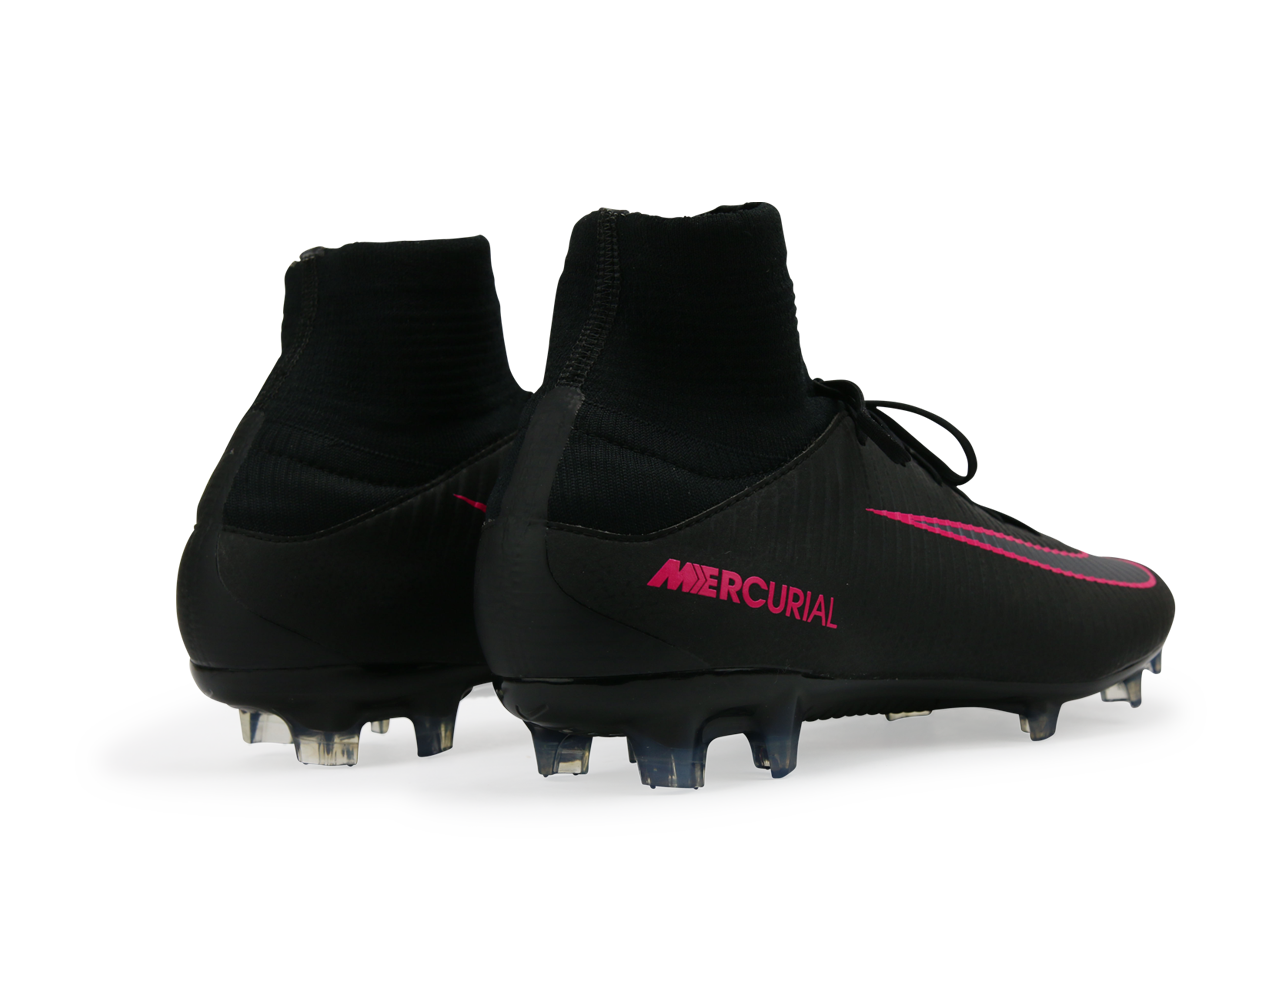 Nike Mercurial Superfly V FG - Pitch Dark Pack - Black / Pink Blast -  Football Shirt Culture - Latest Football Kit News and More